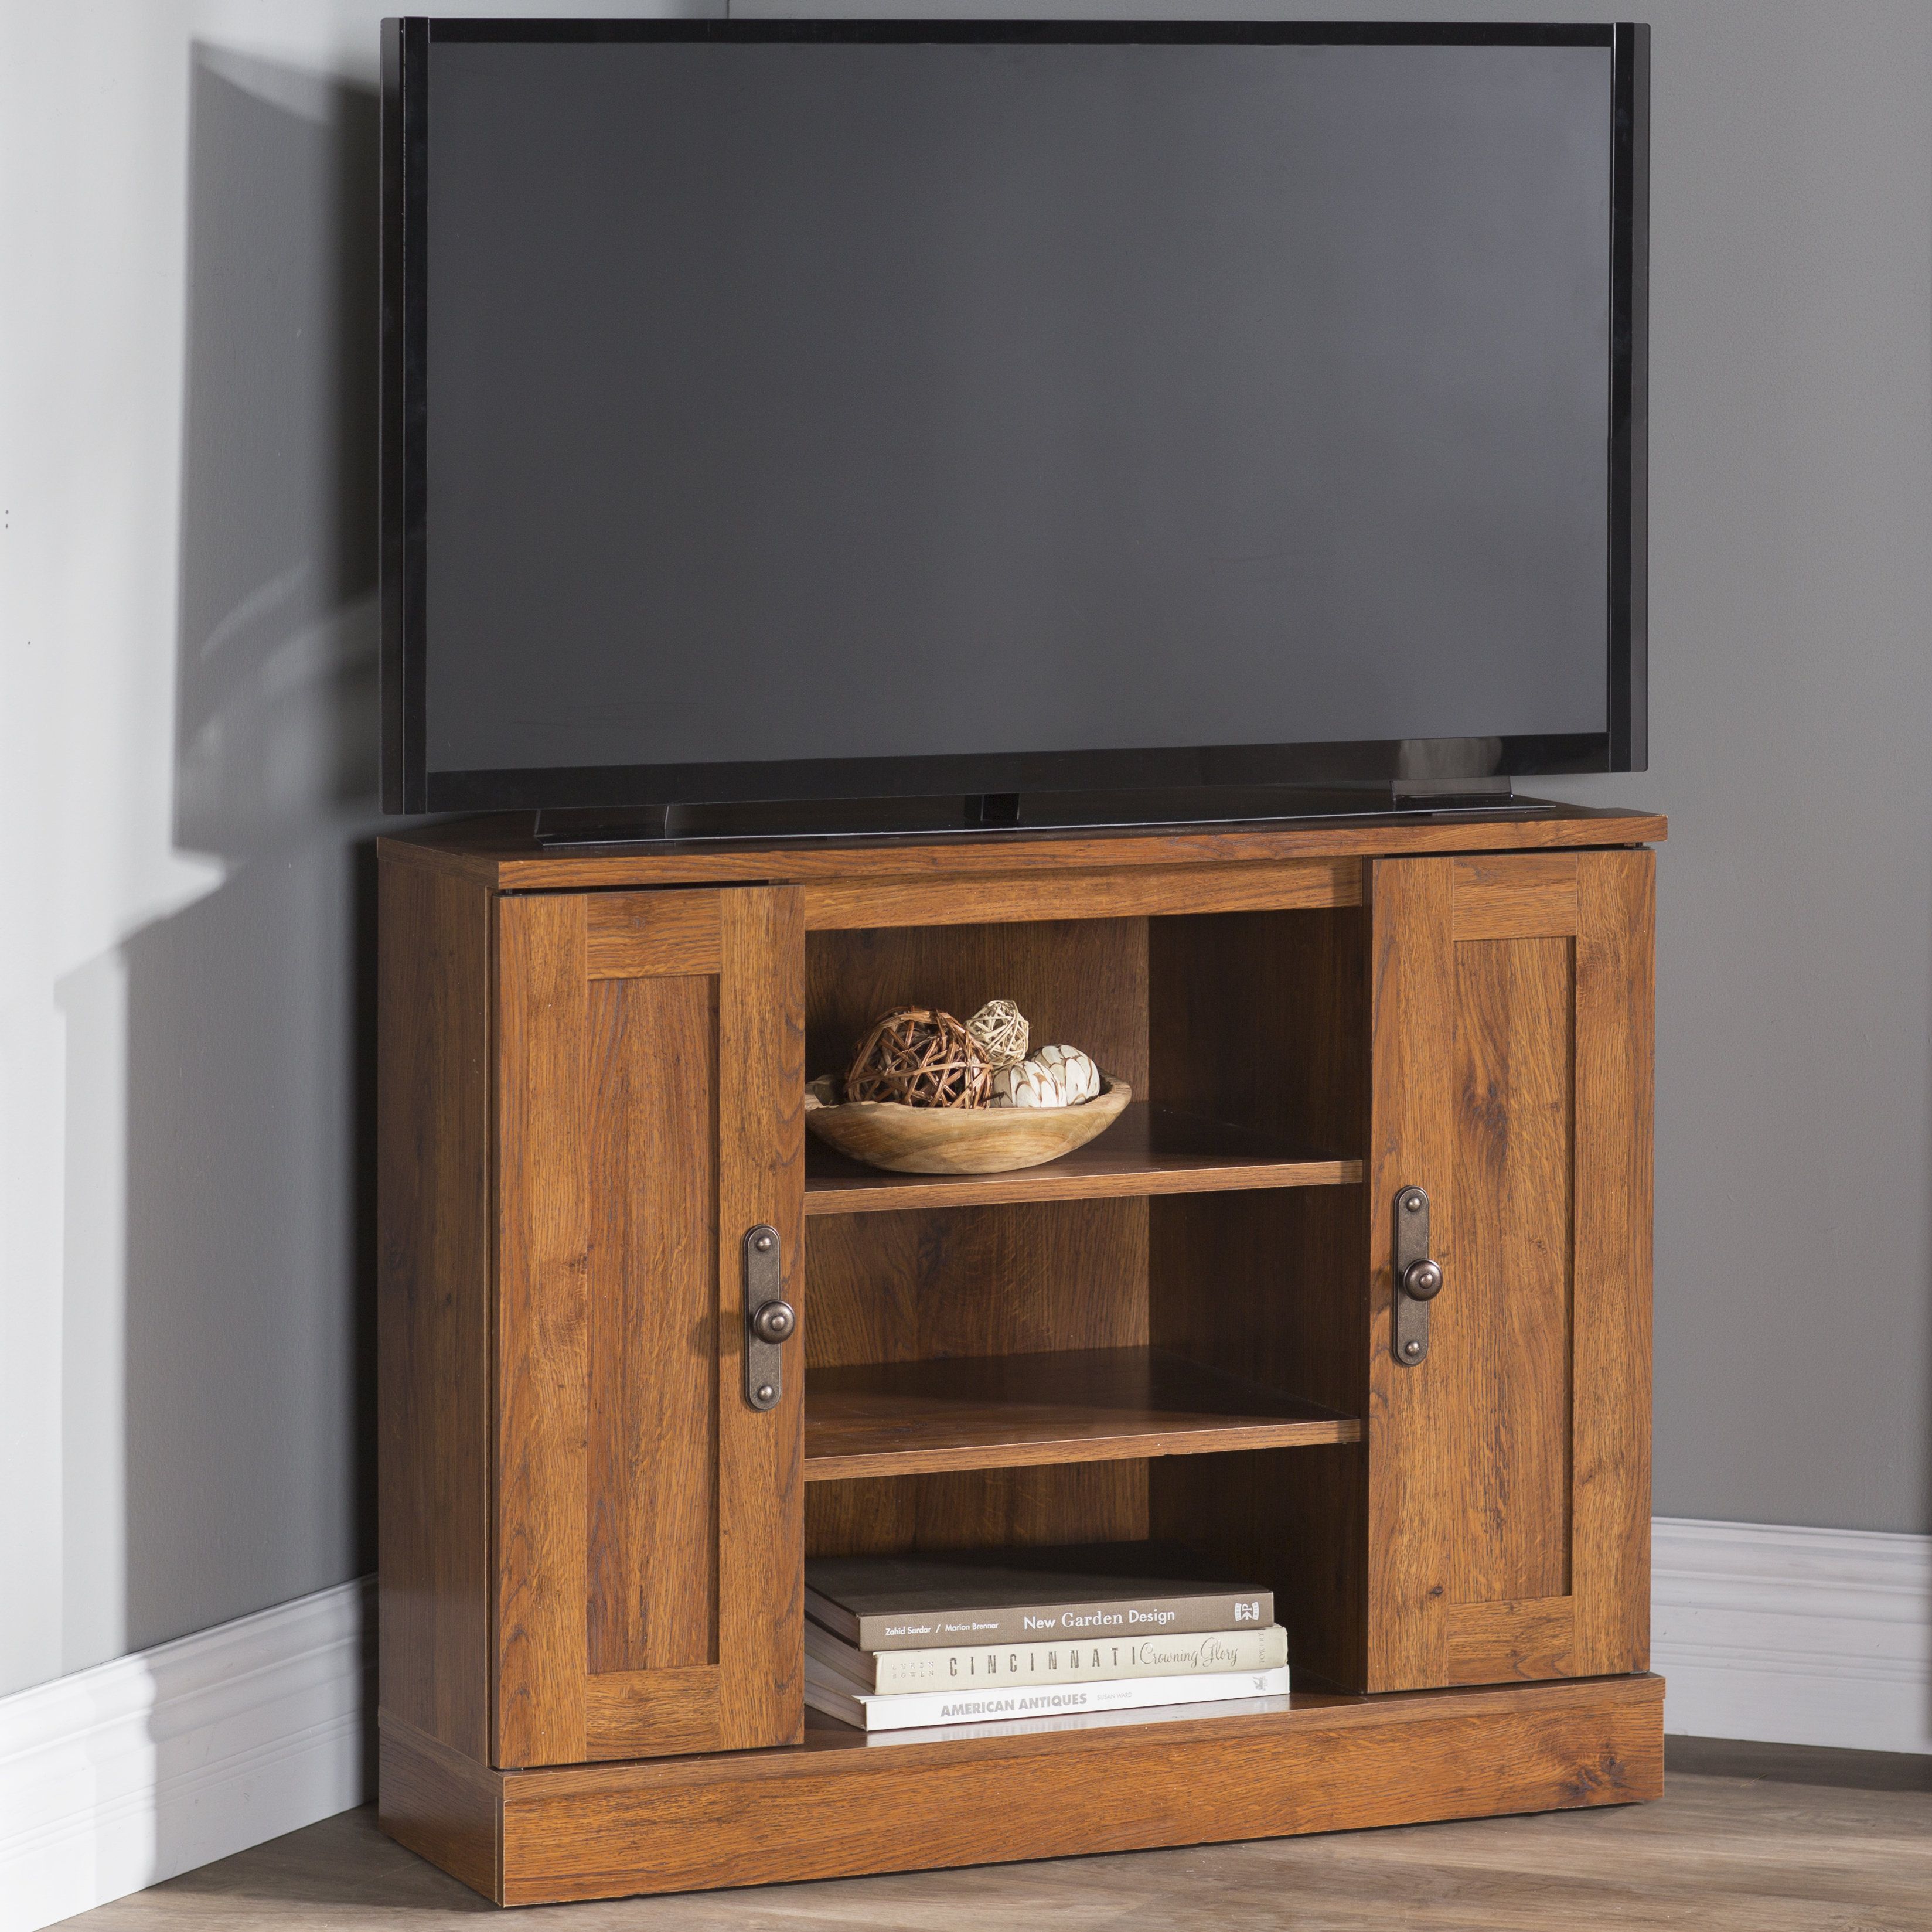 Tv Stands You'll Love | Wayfair (View 20 of 30)